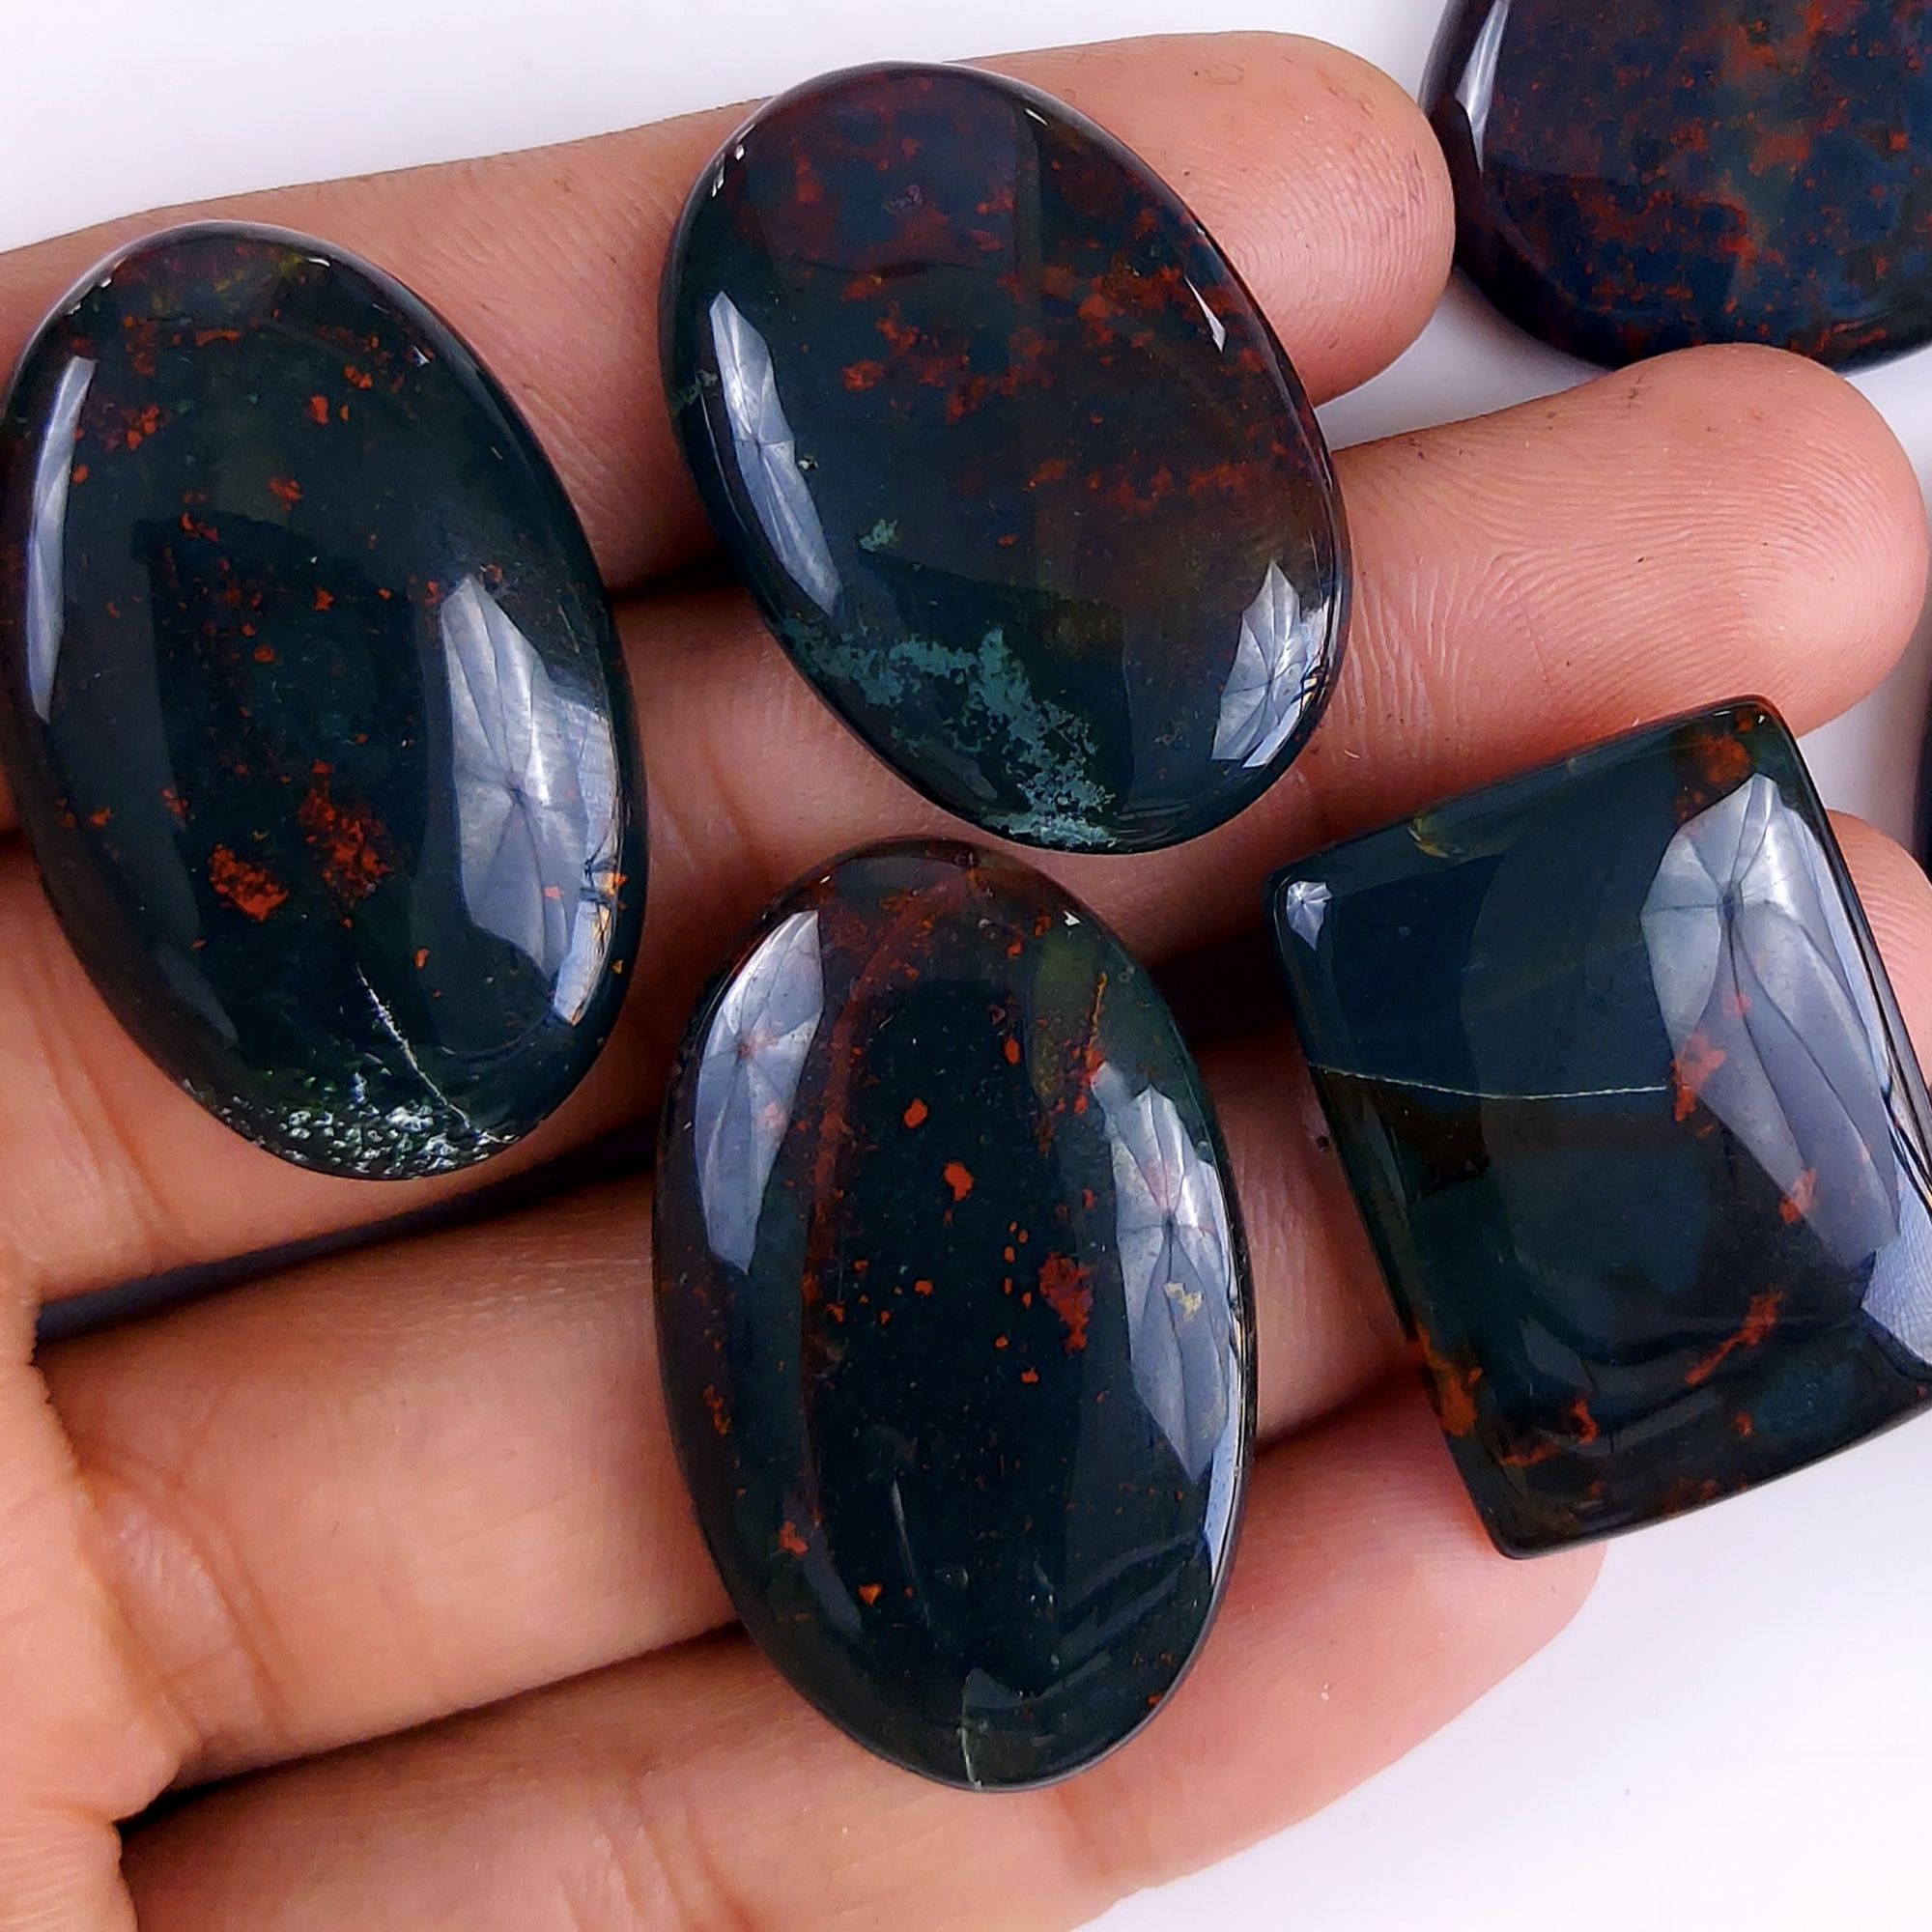 7Pcs 309Cts  Natural Green Blood Stone Loose Cabochon Gemstone Lot For Jewelry Making Gift For Her 50x28 30x22mm#924